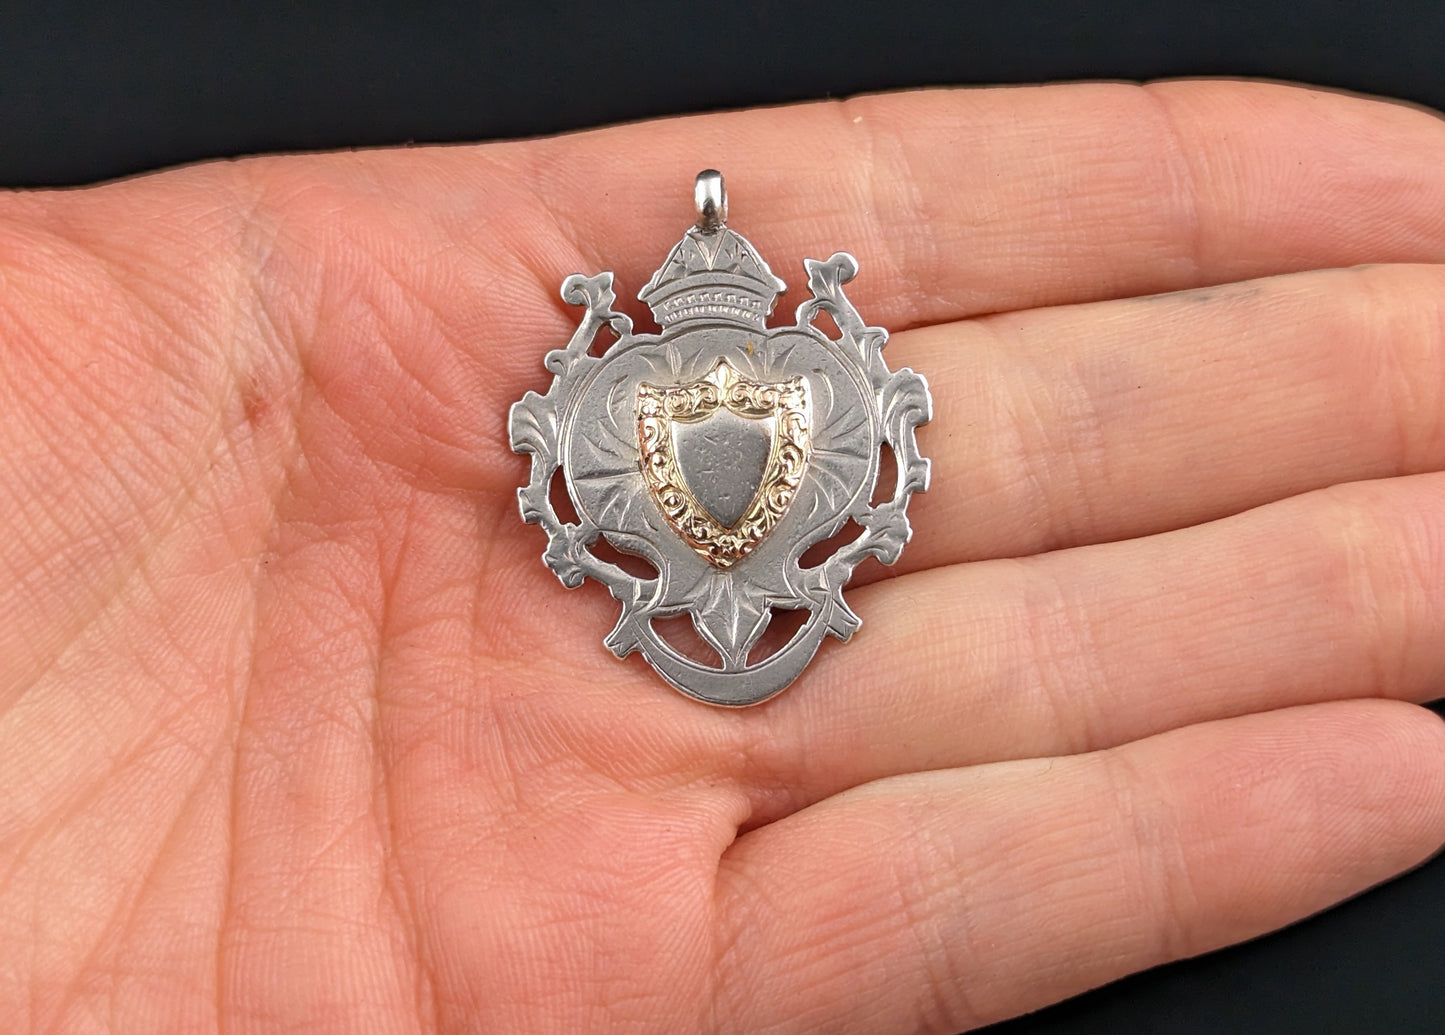 Antique silver and gold shield shaped fob pendant